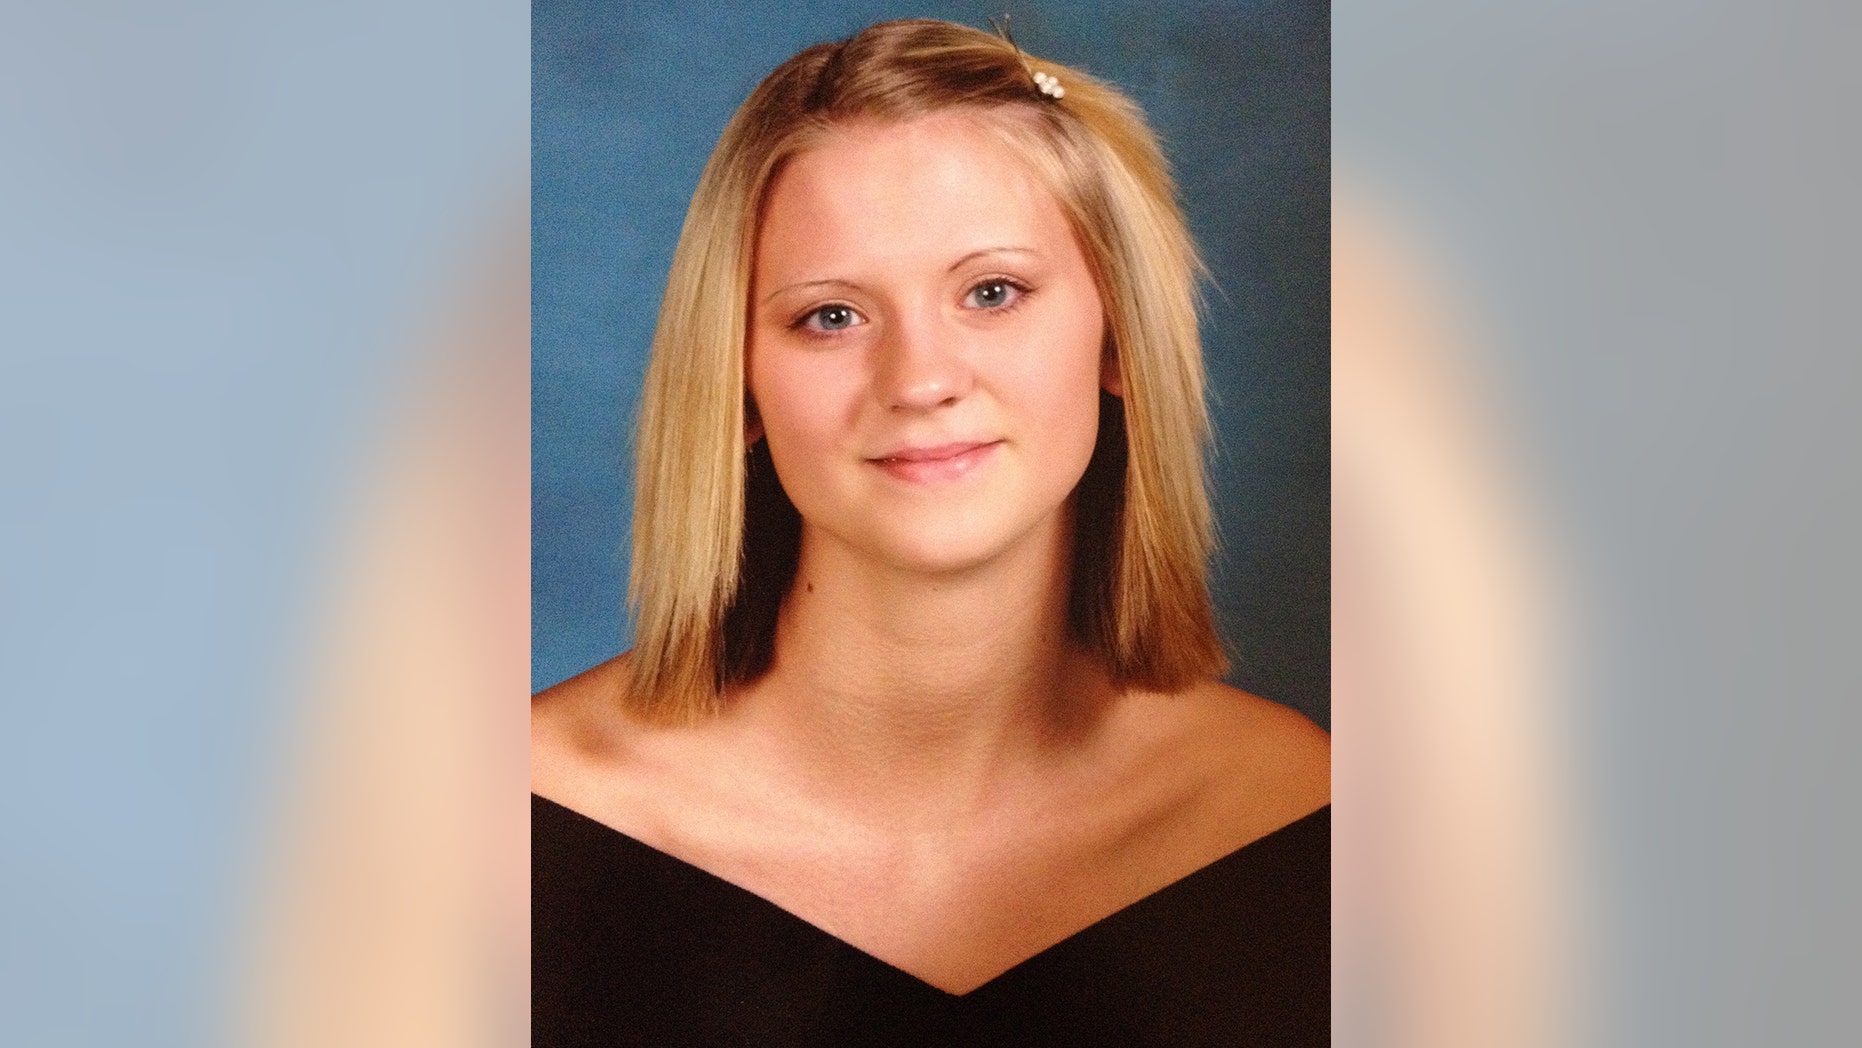 Murder Trial Begins In Gruesome Burning Death Of Former Mississippi Cheerleader Jessica Chambers